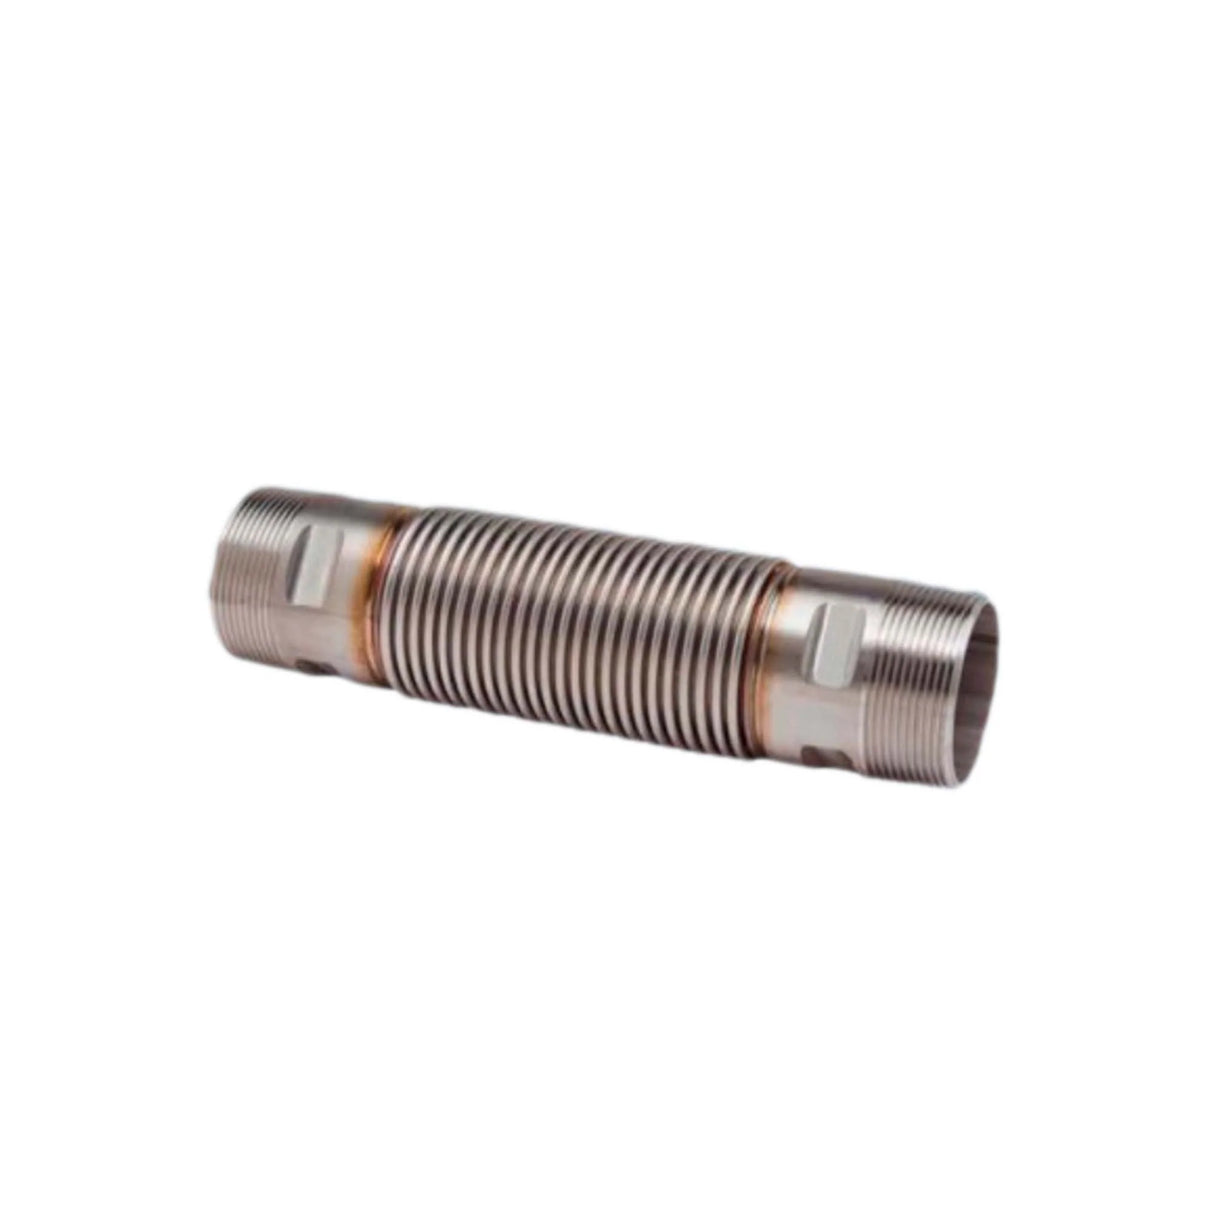 Econex GMM40 Flexible Joint - Threaded Connections